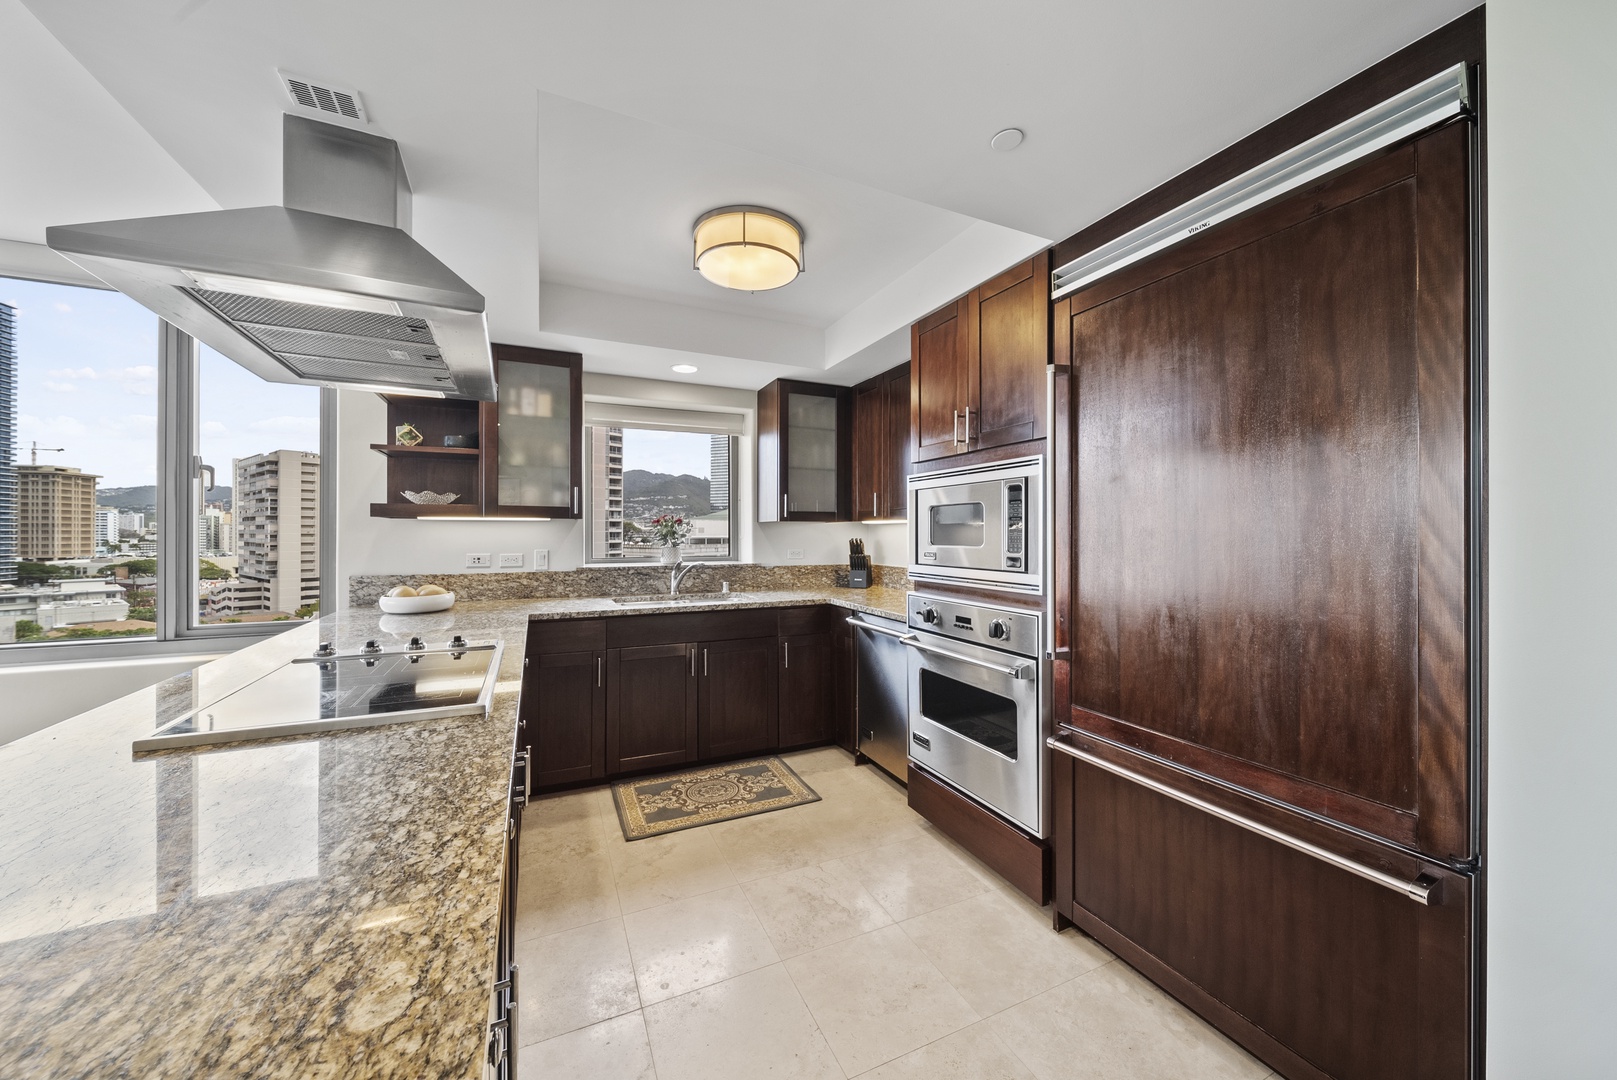 Honolulu Vacation Rentals, Watermark Waikiki Unit 901 - The modern designed kitchen has stainless steel appliances and plenty space to make meal prep convenient.